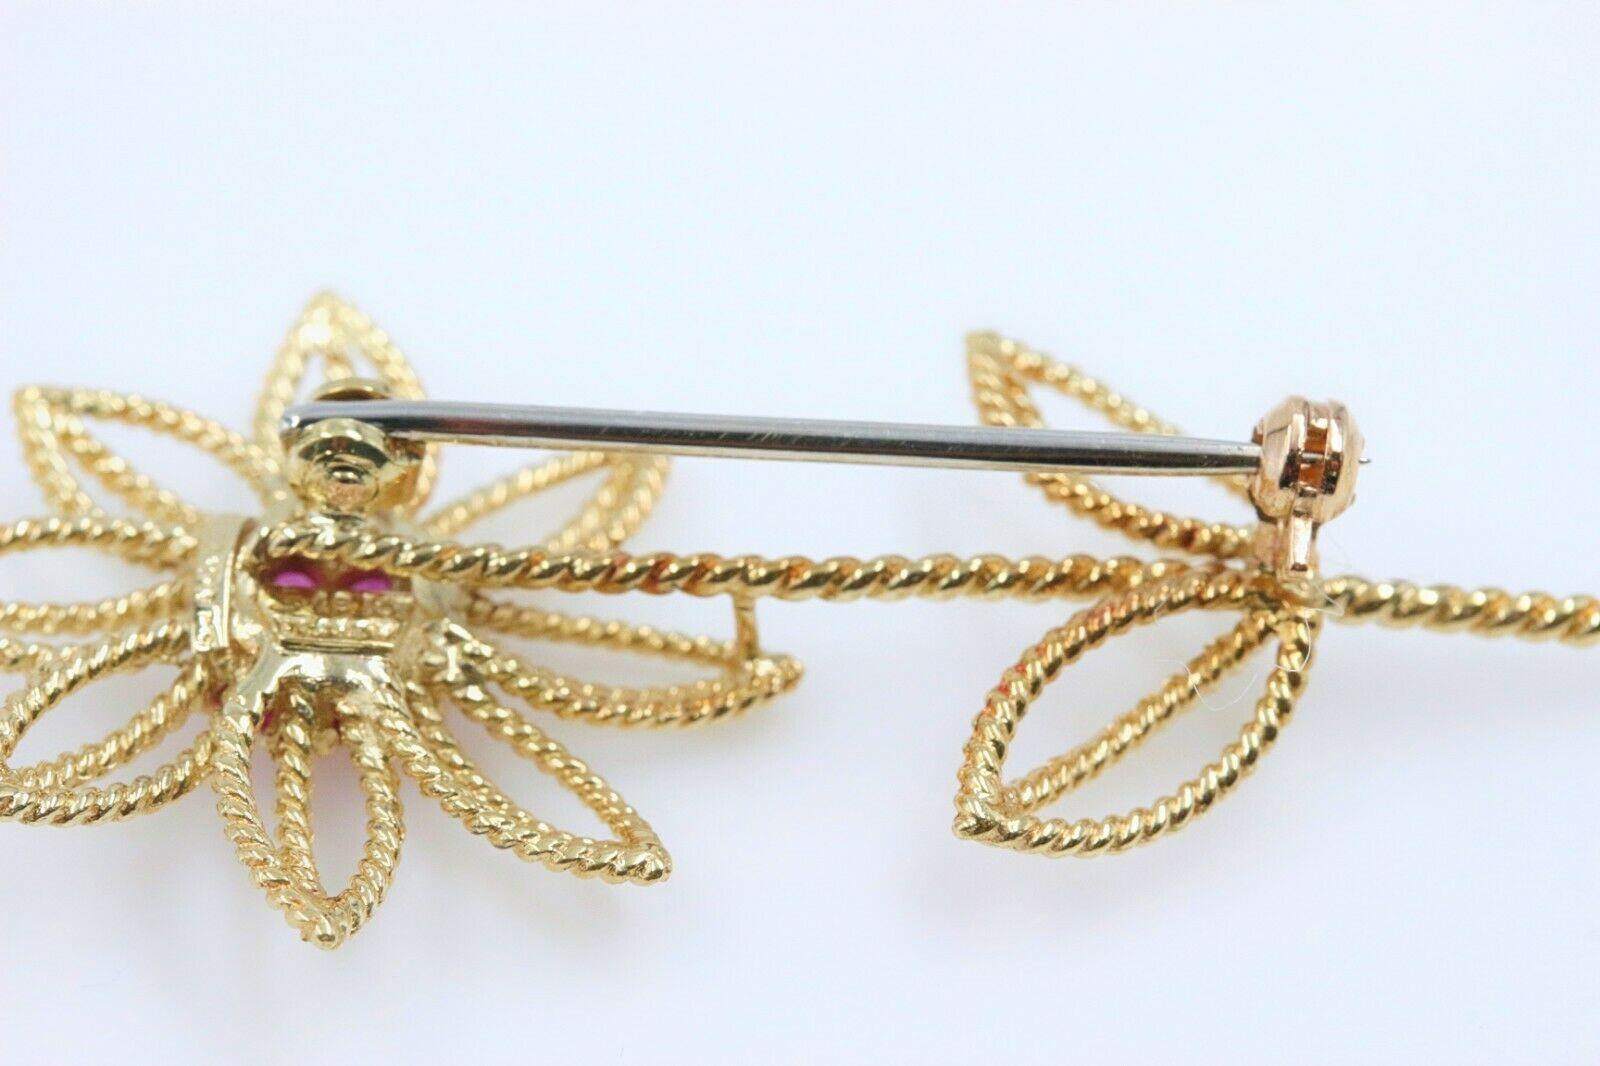 Authentic Vintage 1960s Tiffany & Co 18 Karat Gold Flower Brooch with Rubies 2